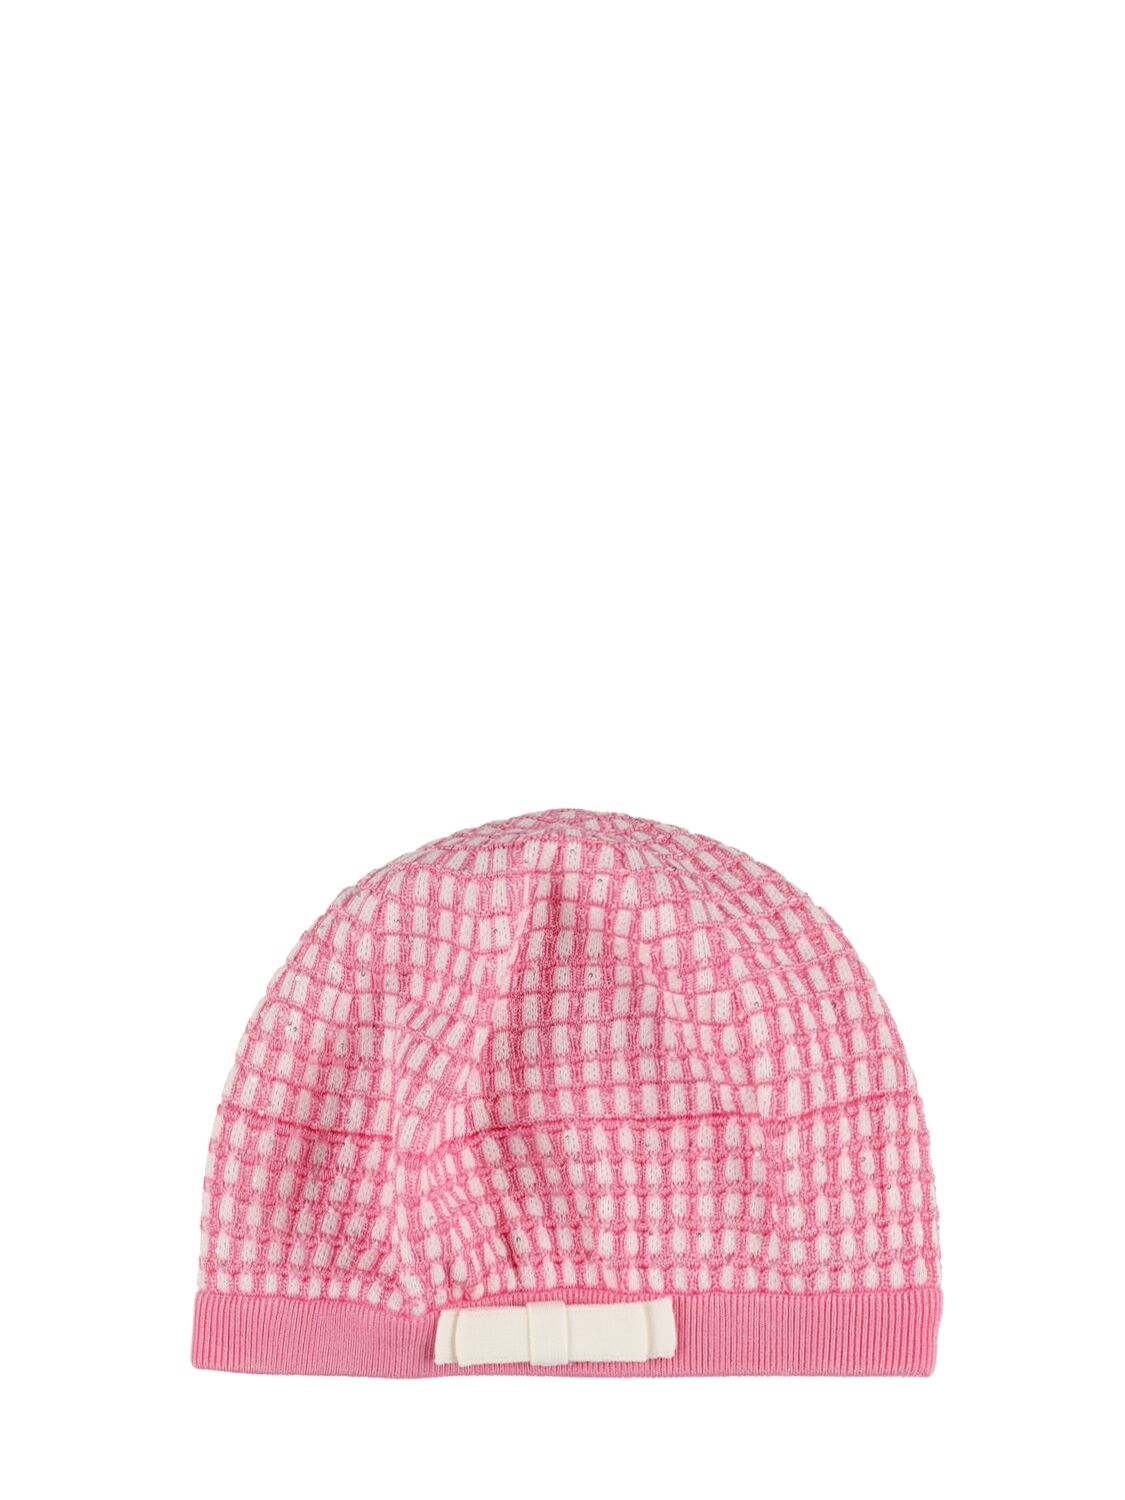 Image of Cotton & Wool Knit Hat